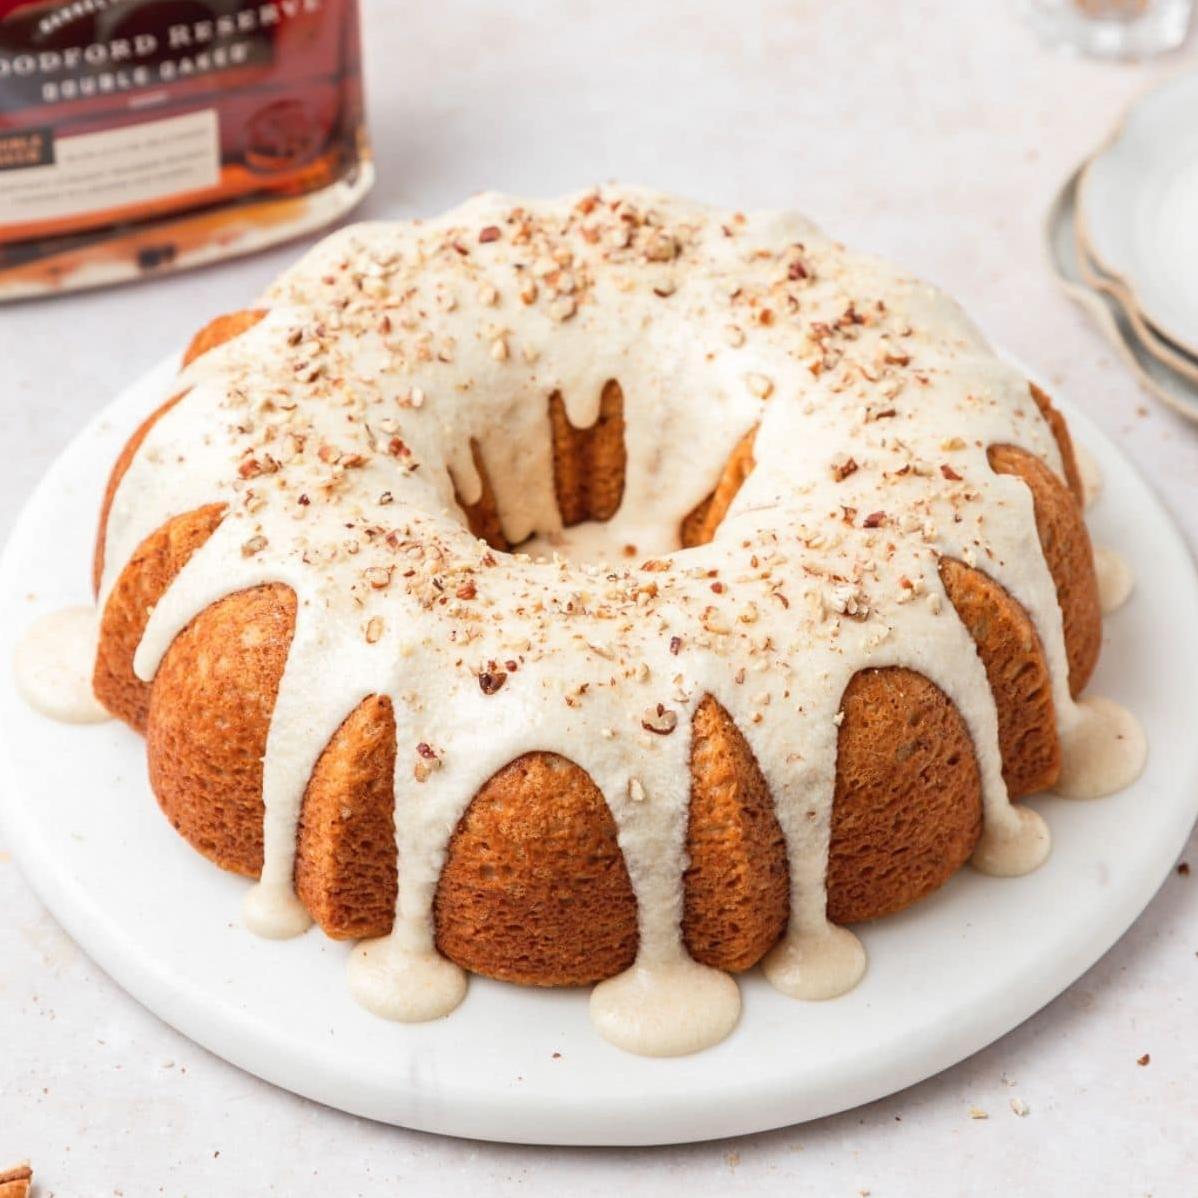  Make your neighbors envious with the beautiful golden crust of this cake.